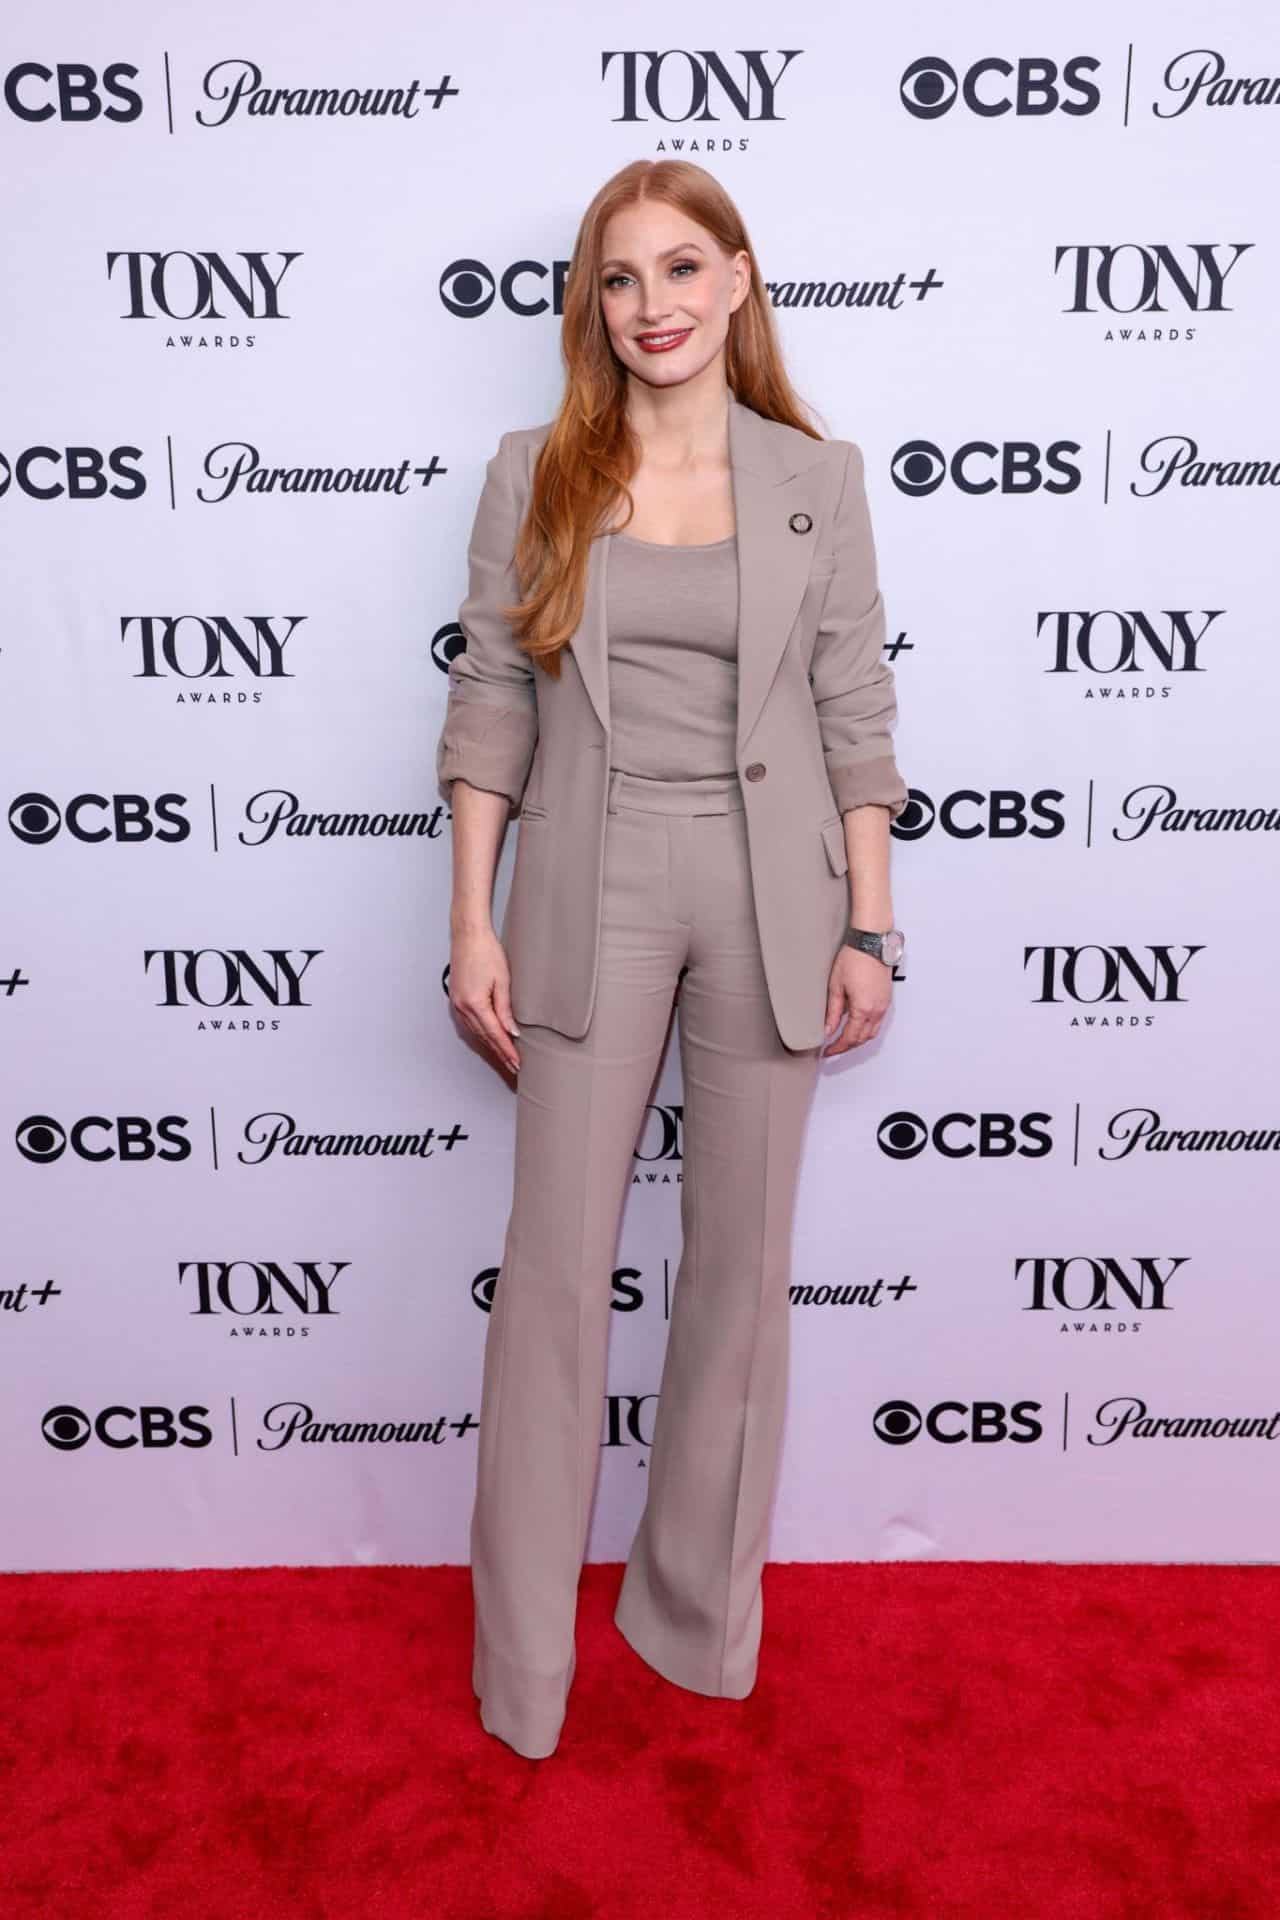 Jessica Chastain Shines at Tony Awards Meet The Nominees Press Event